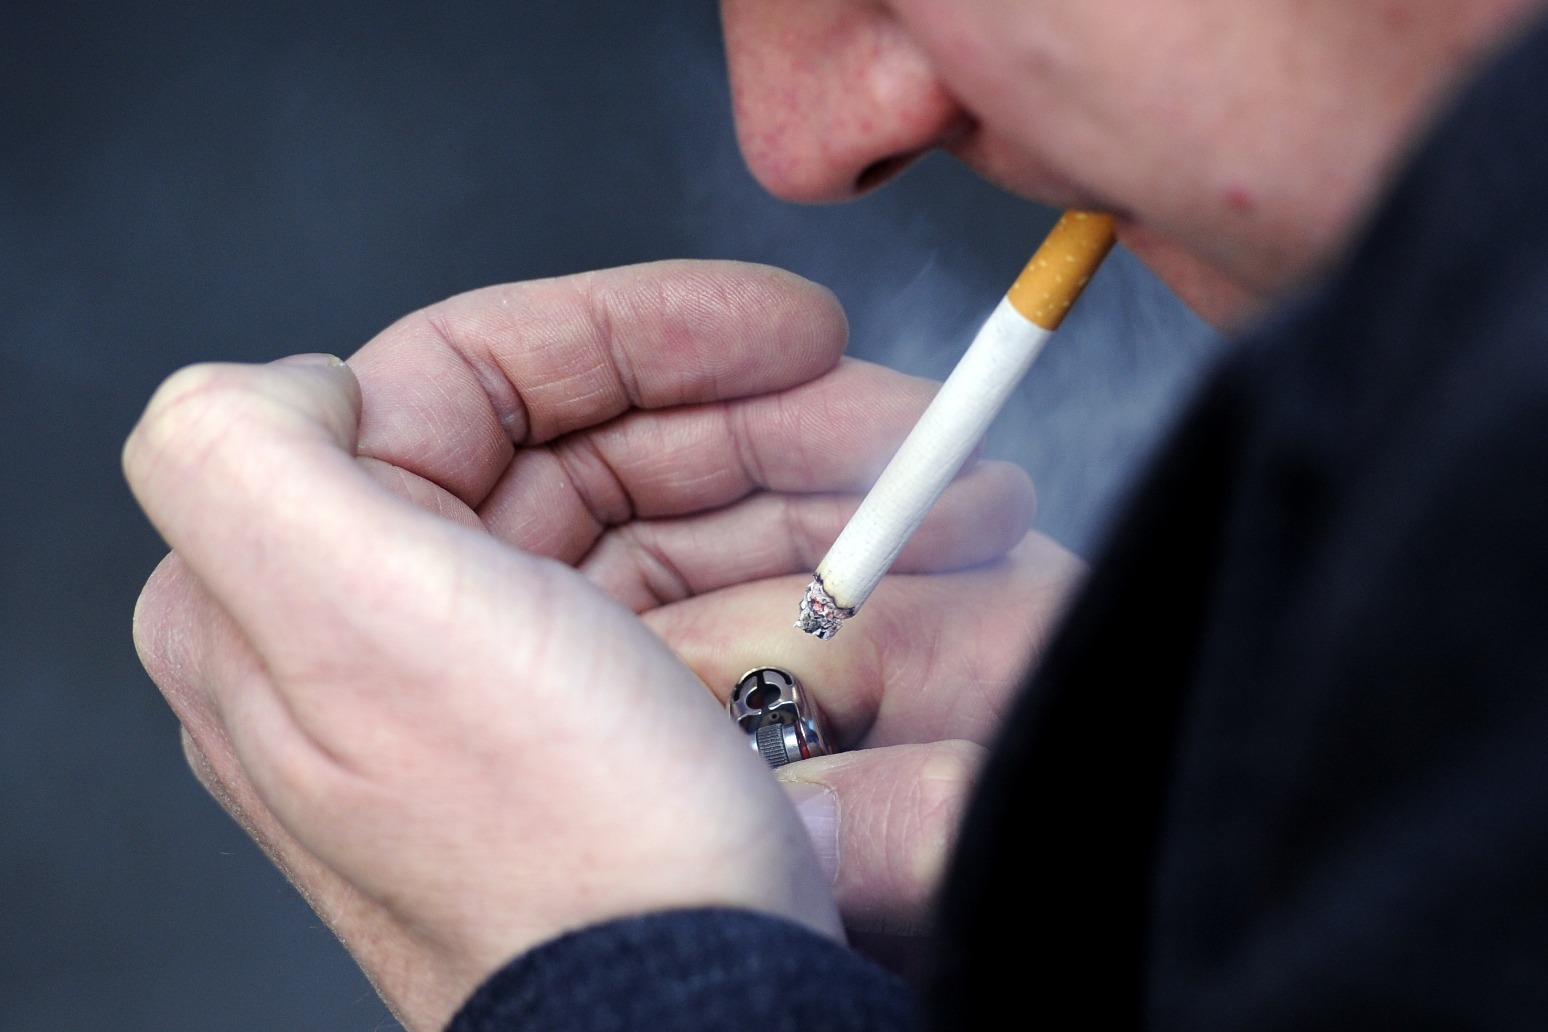 Smoking report could see minimum legal age raised gradually 'year on year' 